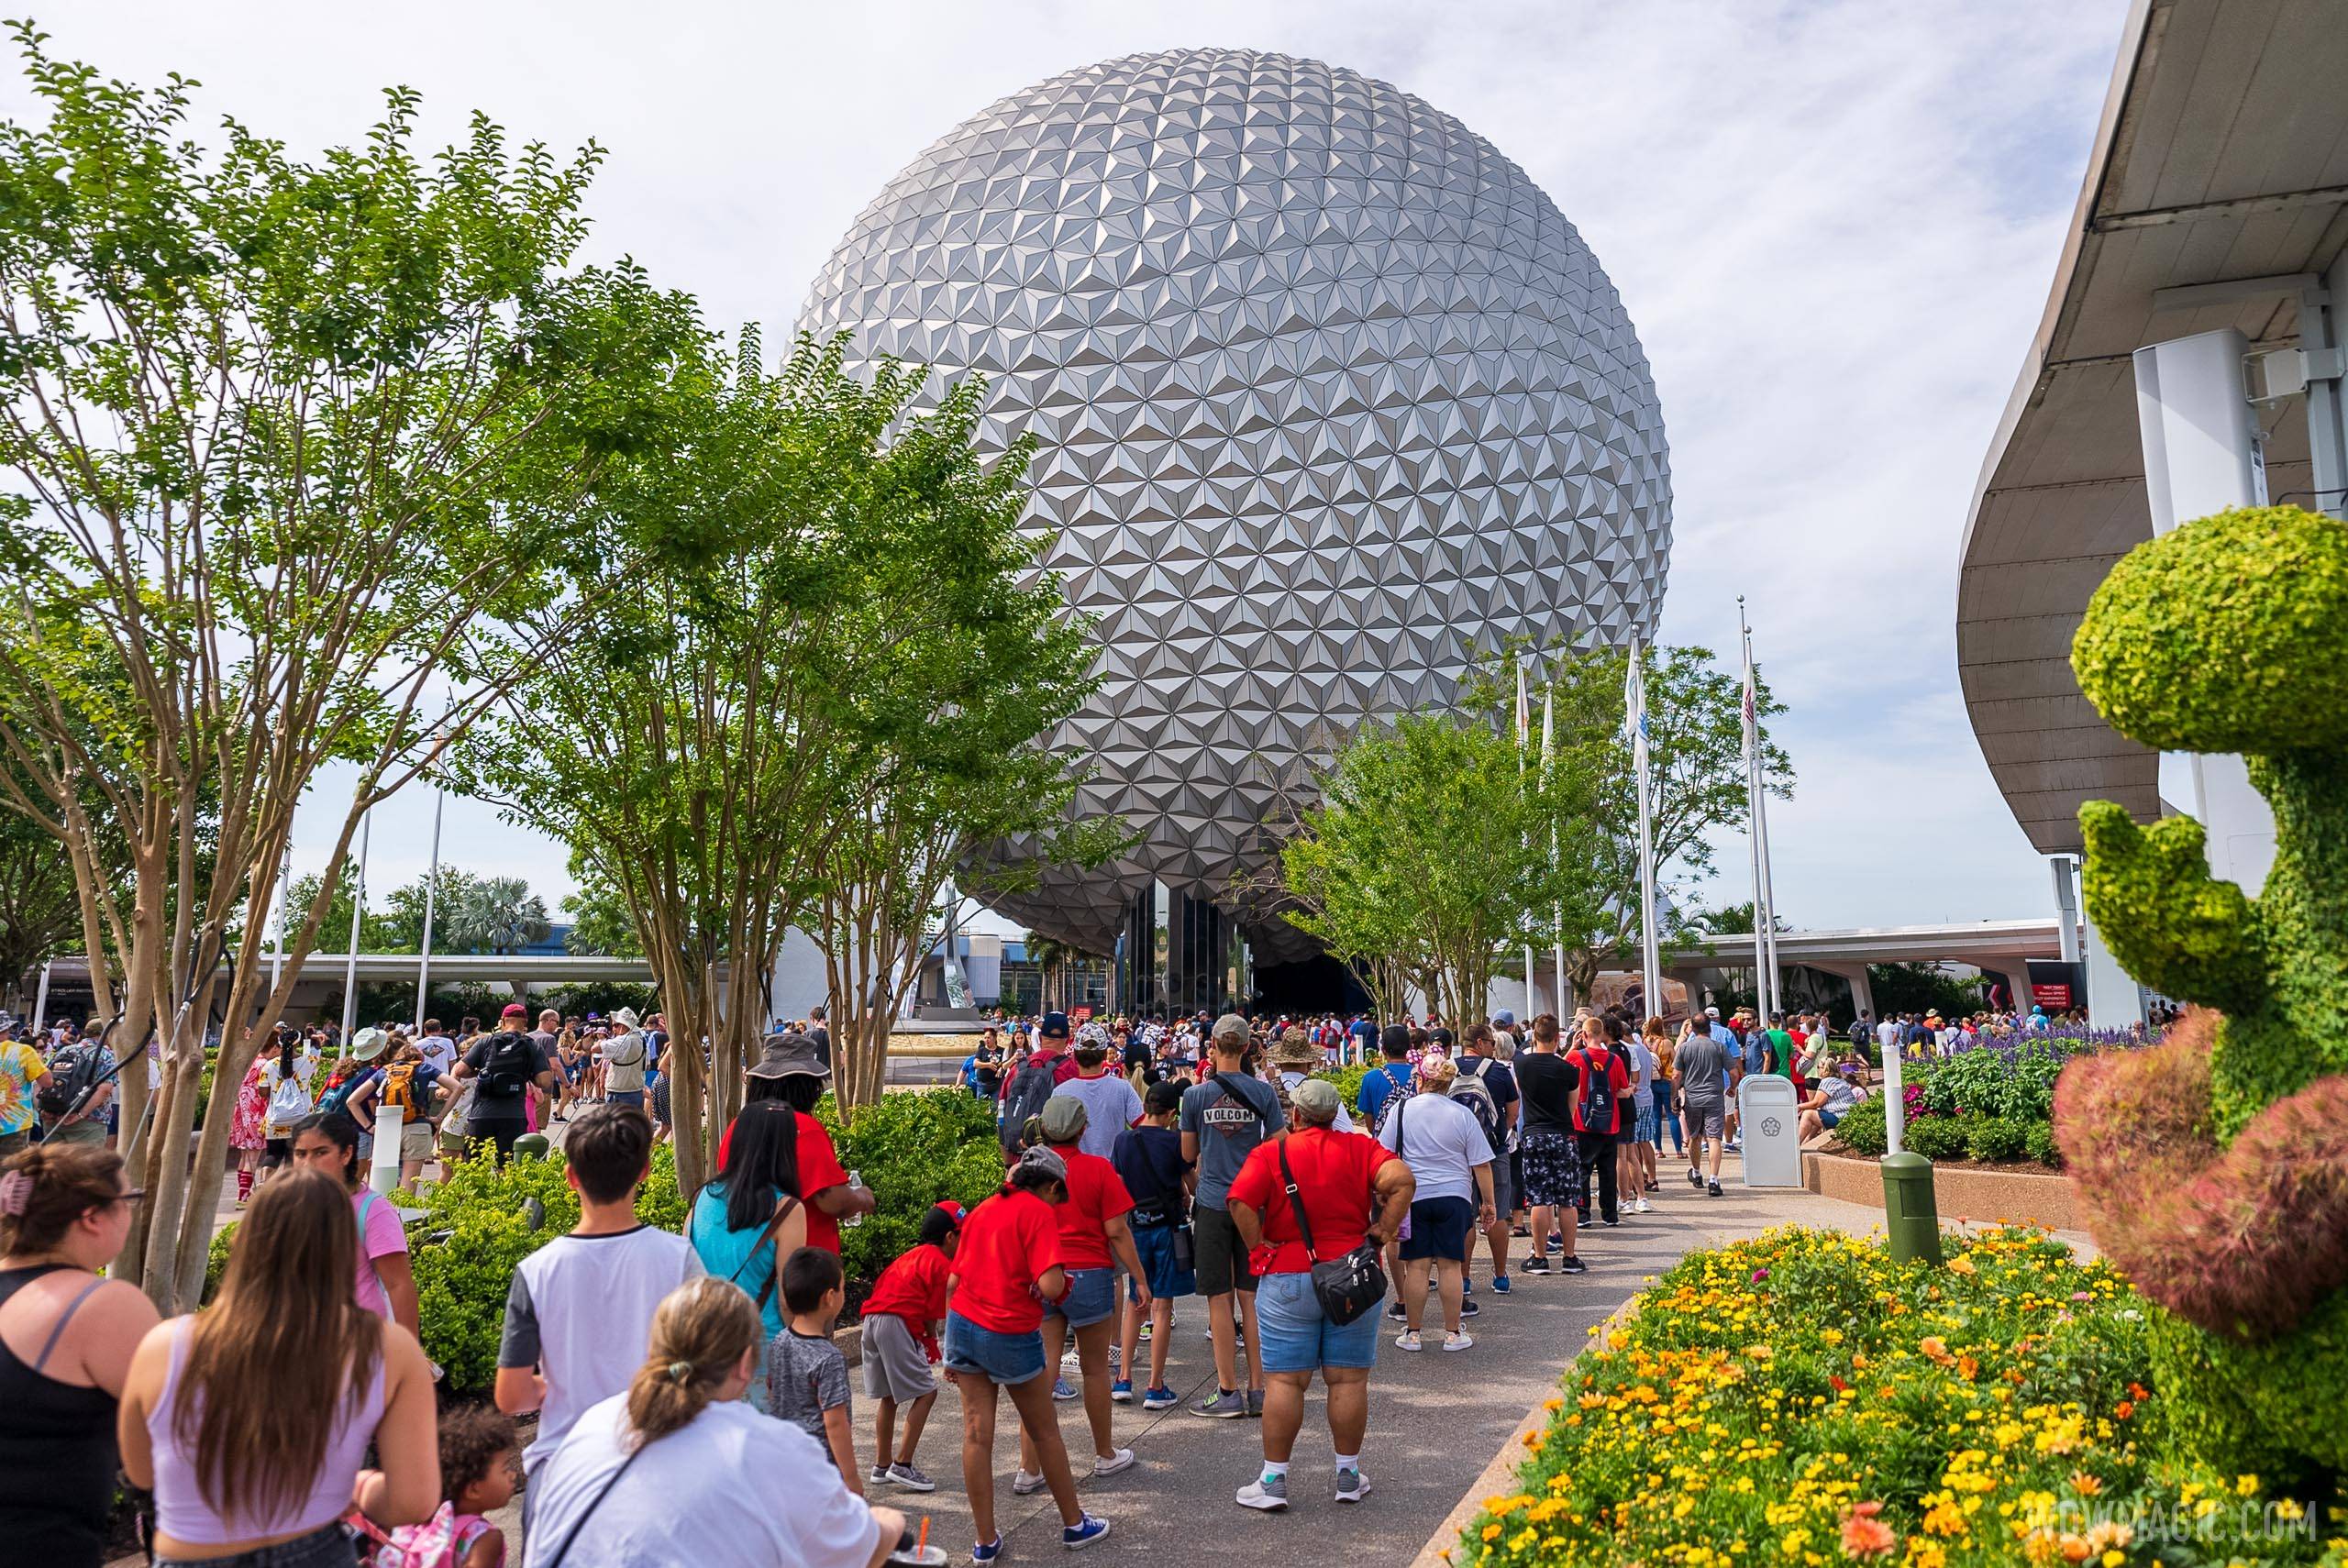 Guests are allowed into the EPCOT main entrance plaza at 10am for an 11am opening